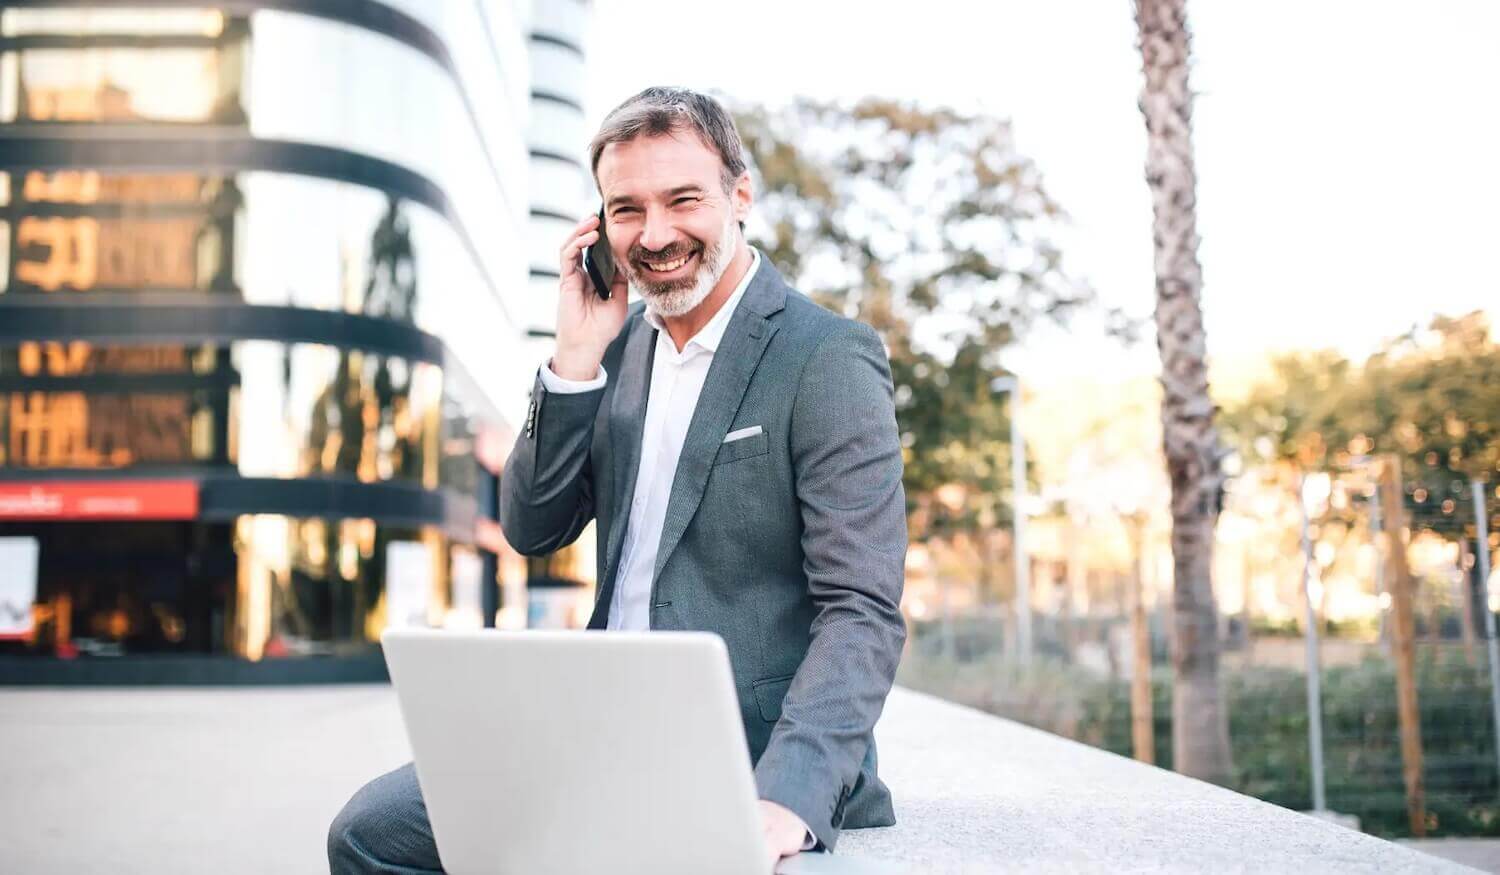 Financial Services CEO Sitting On Wall With City Backdrop Smiling On Phone With Laptop